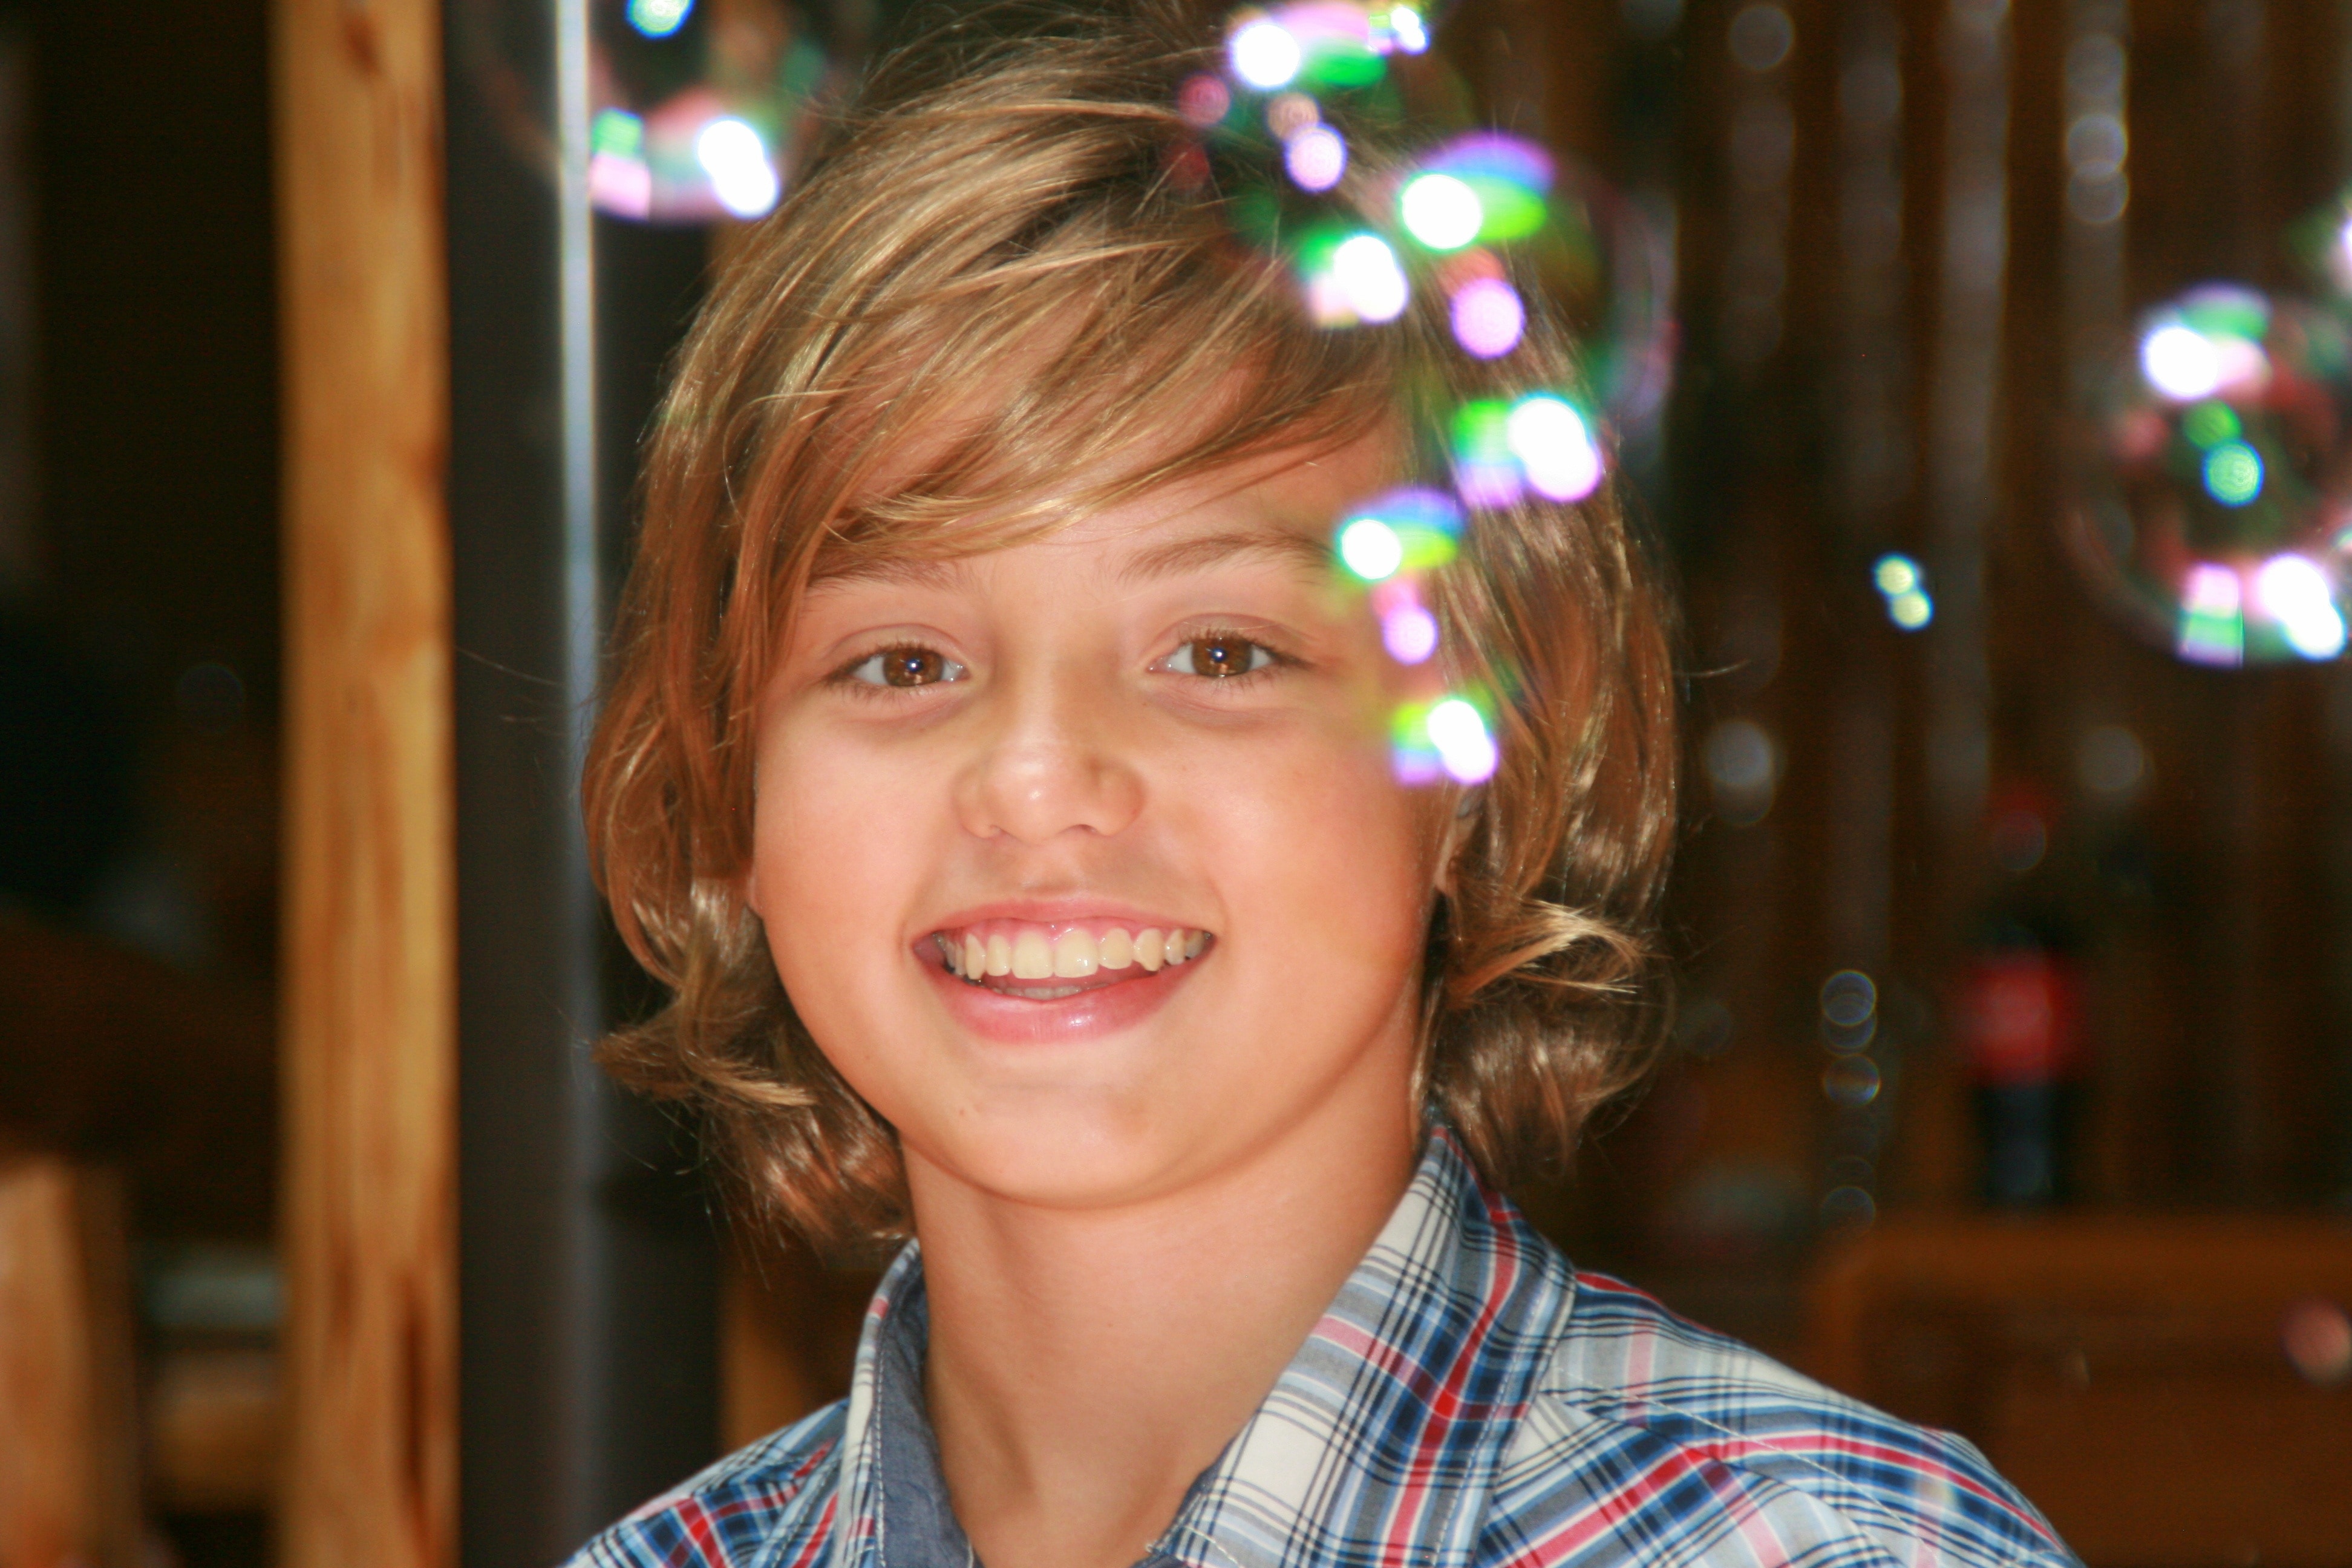 boy wearing white and blue plaid collared shirt